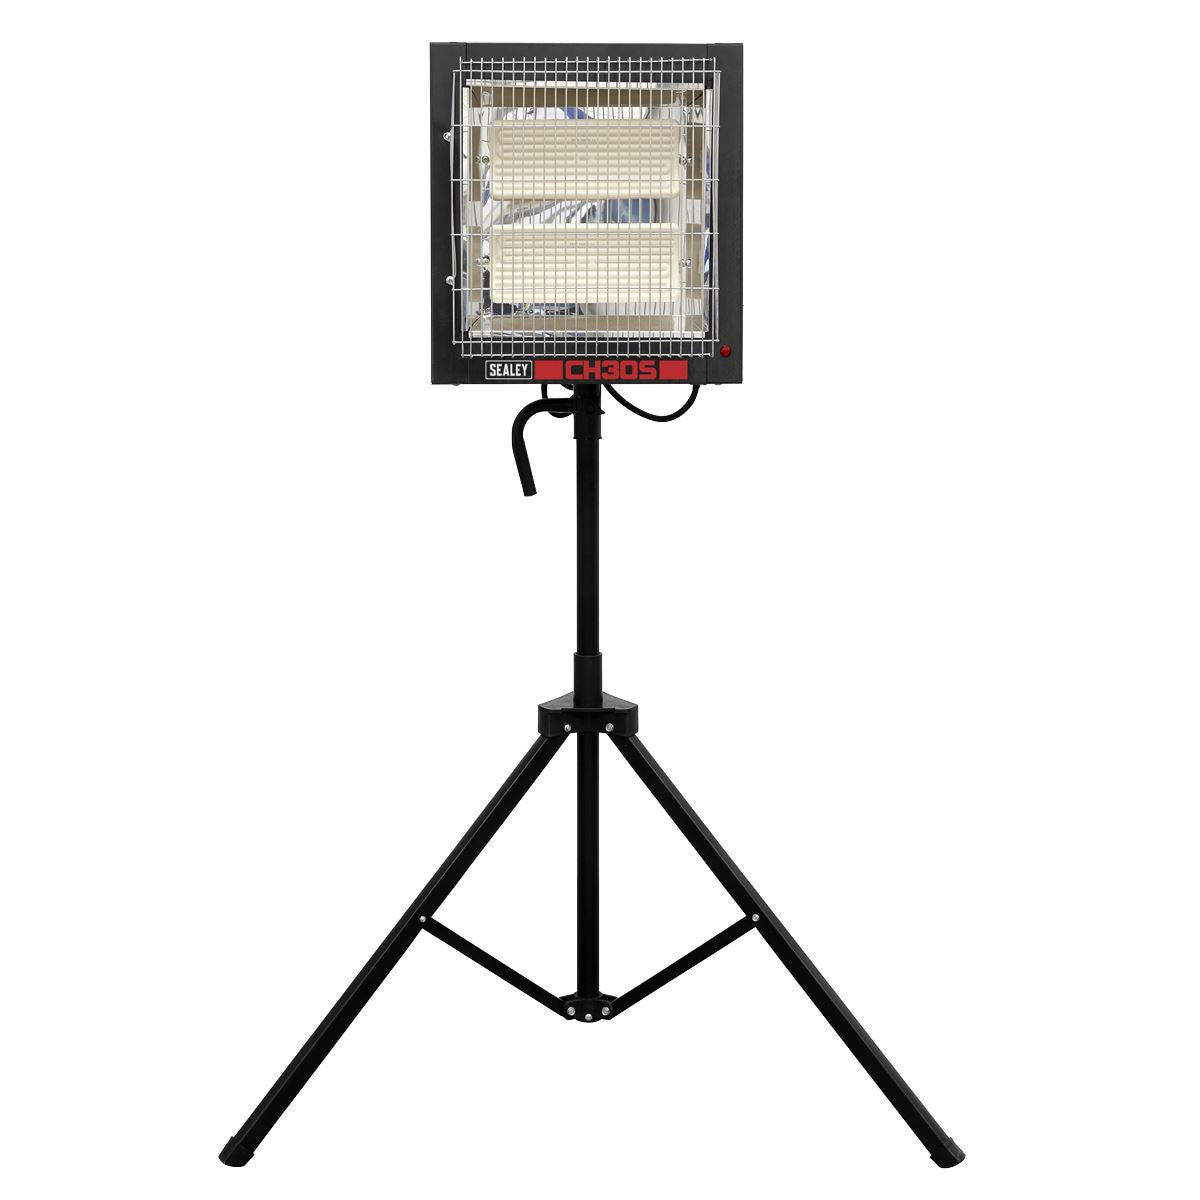 Sealey Ceramic Heater with Tripod Stand 1.4/2.8kW 230V